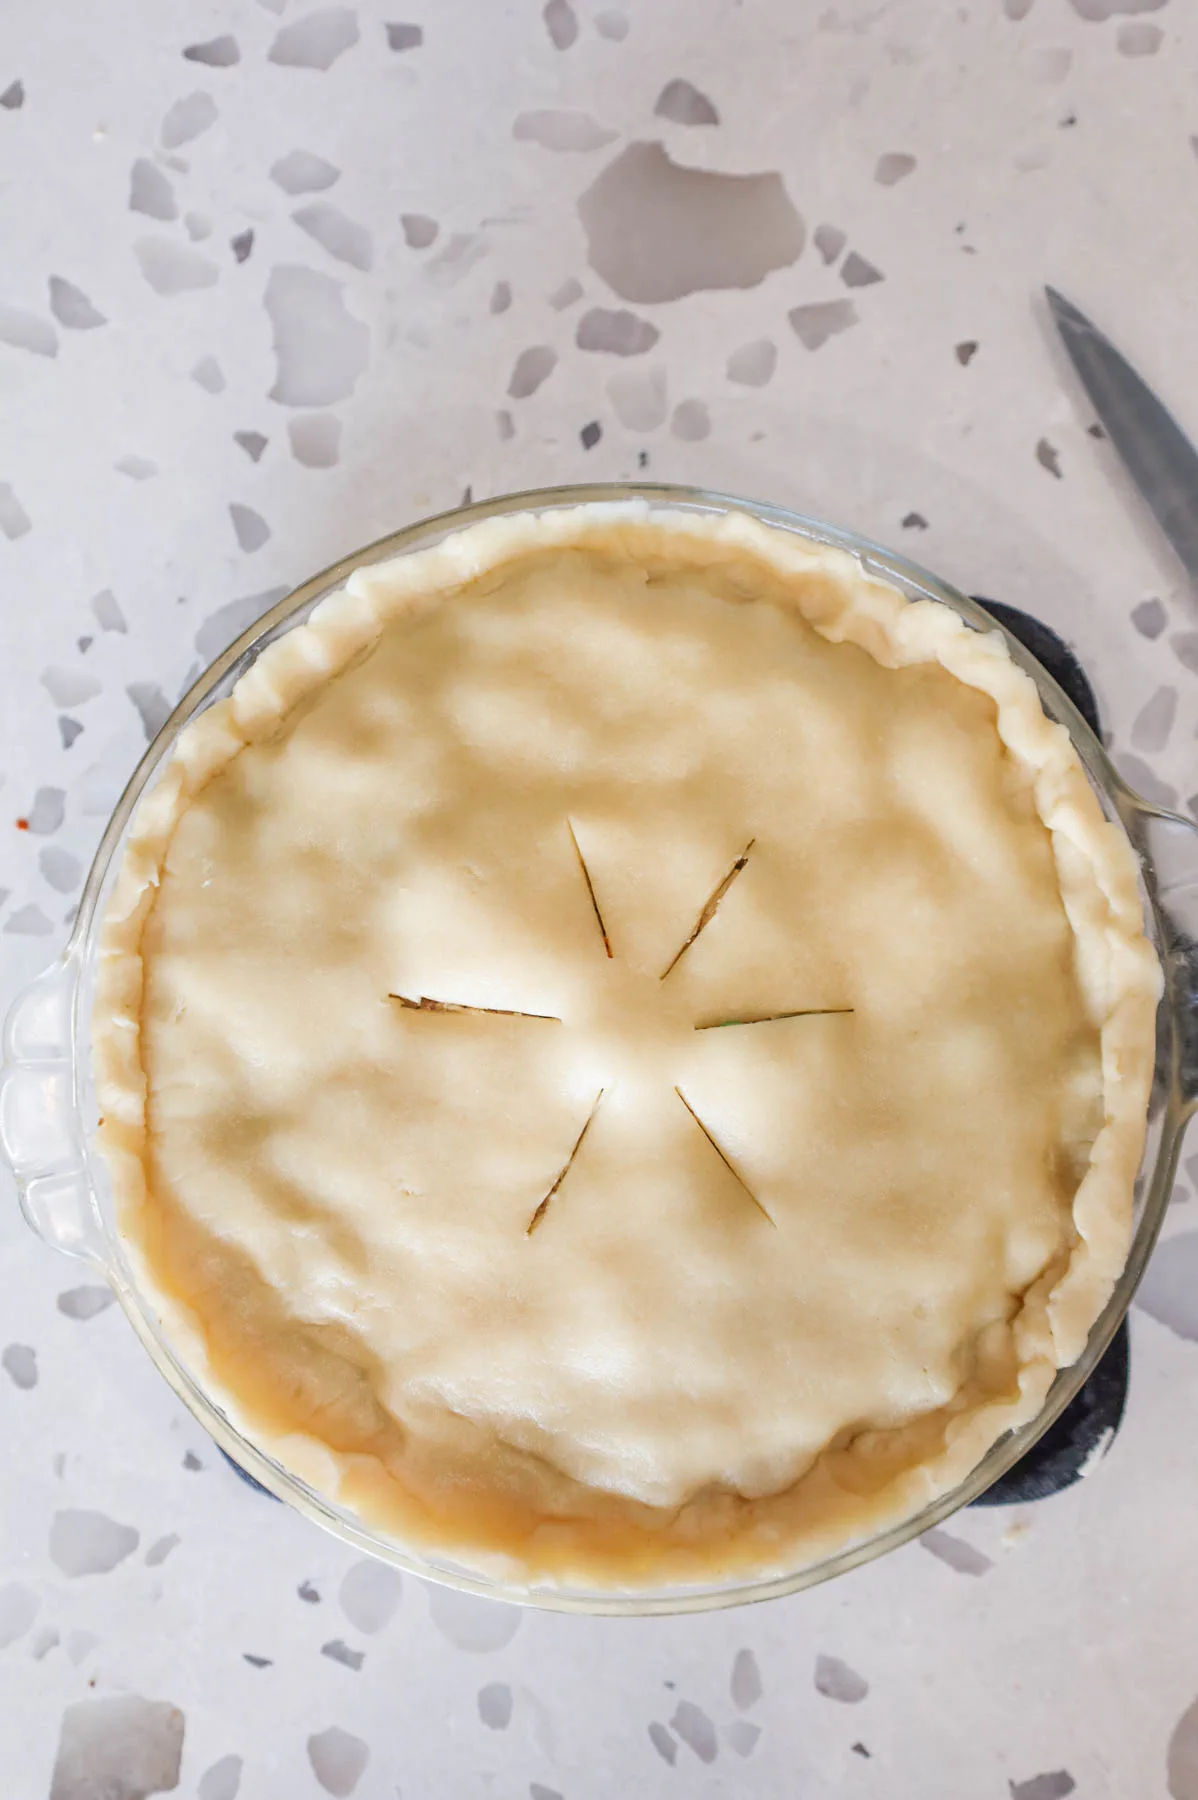 slits cut into top of pie crust before baking